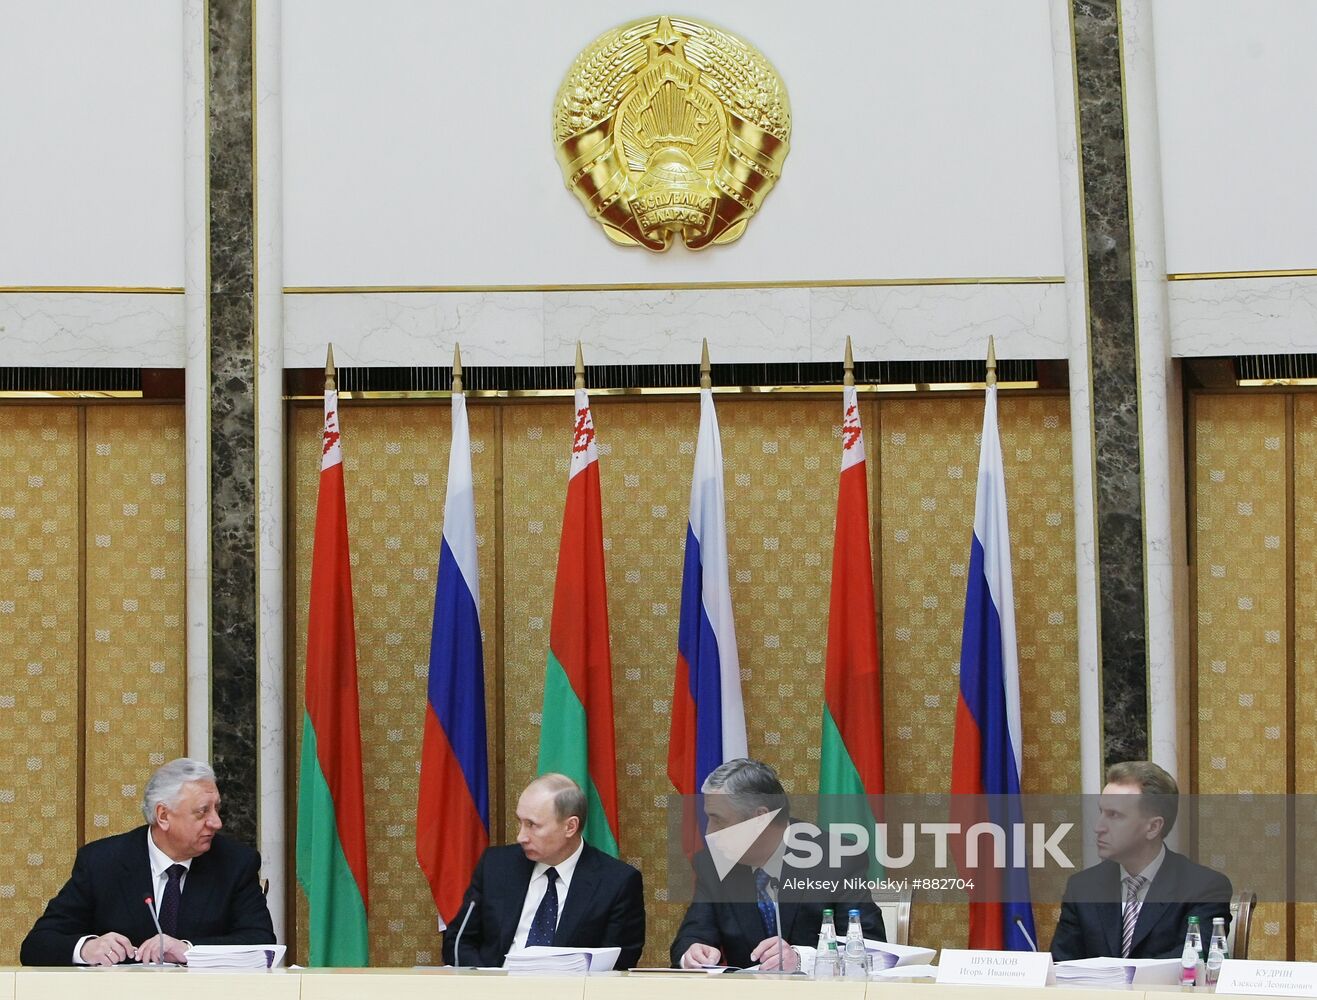 Union State Council of Ministers meeting in Minsk